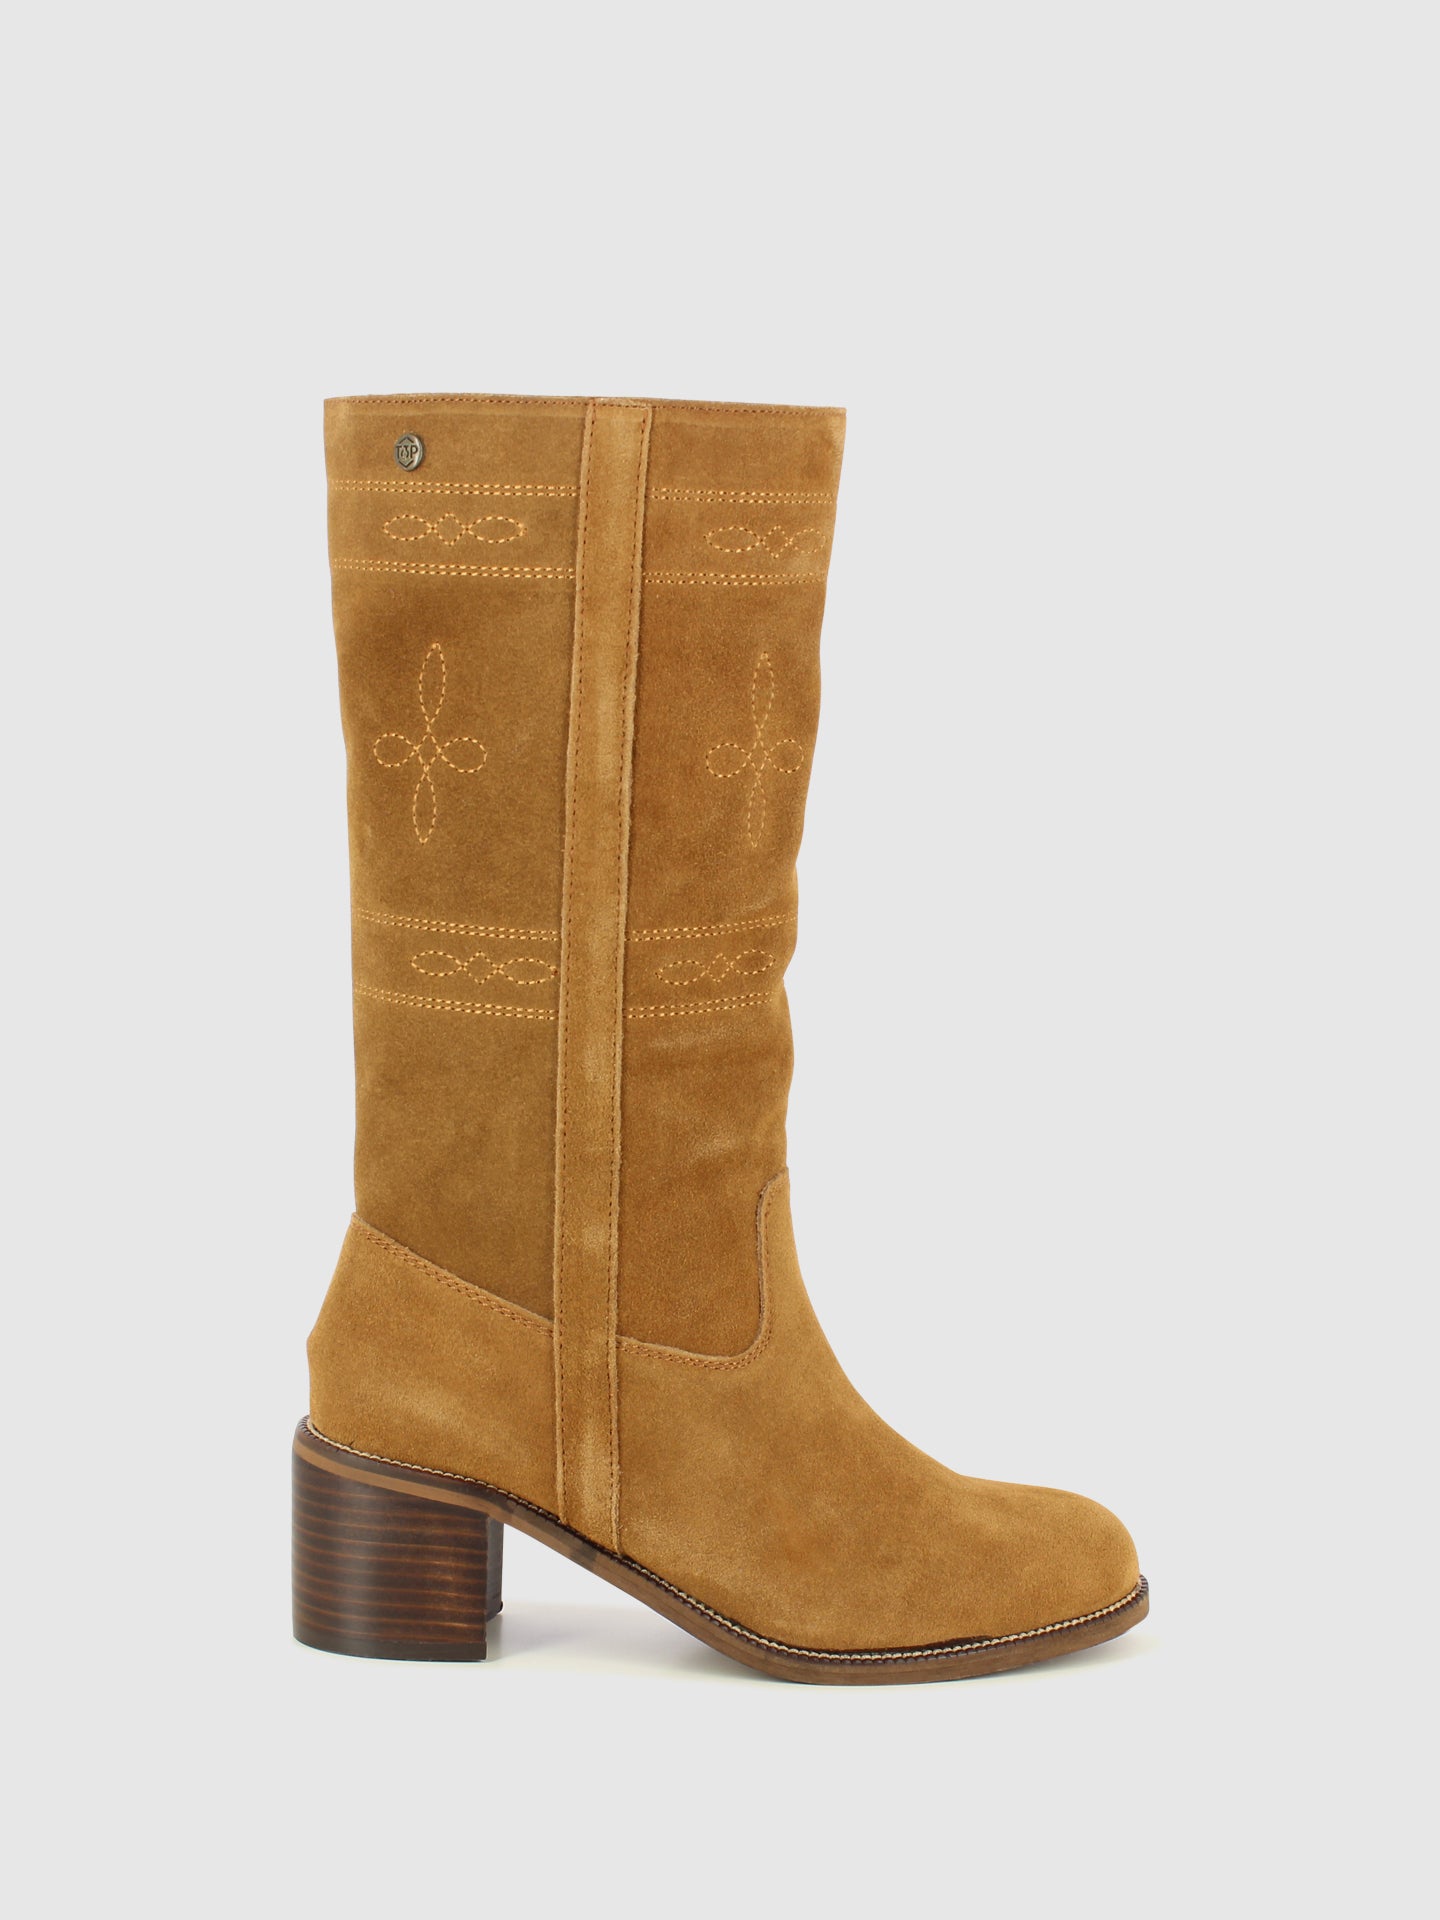 Top3 Camel Round Toe Boots